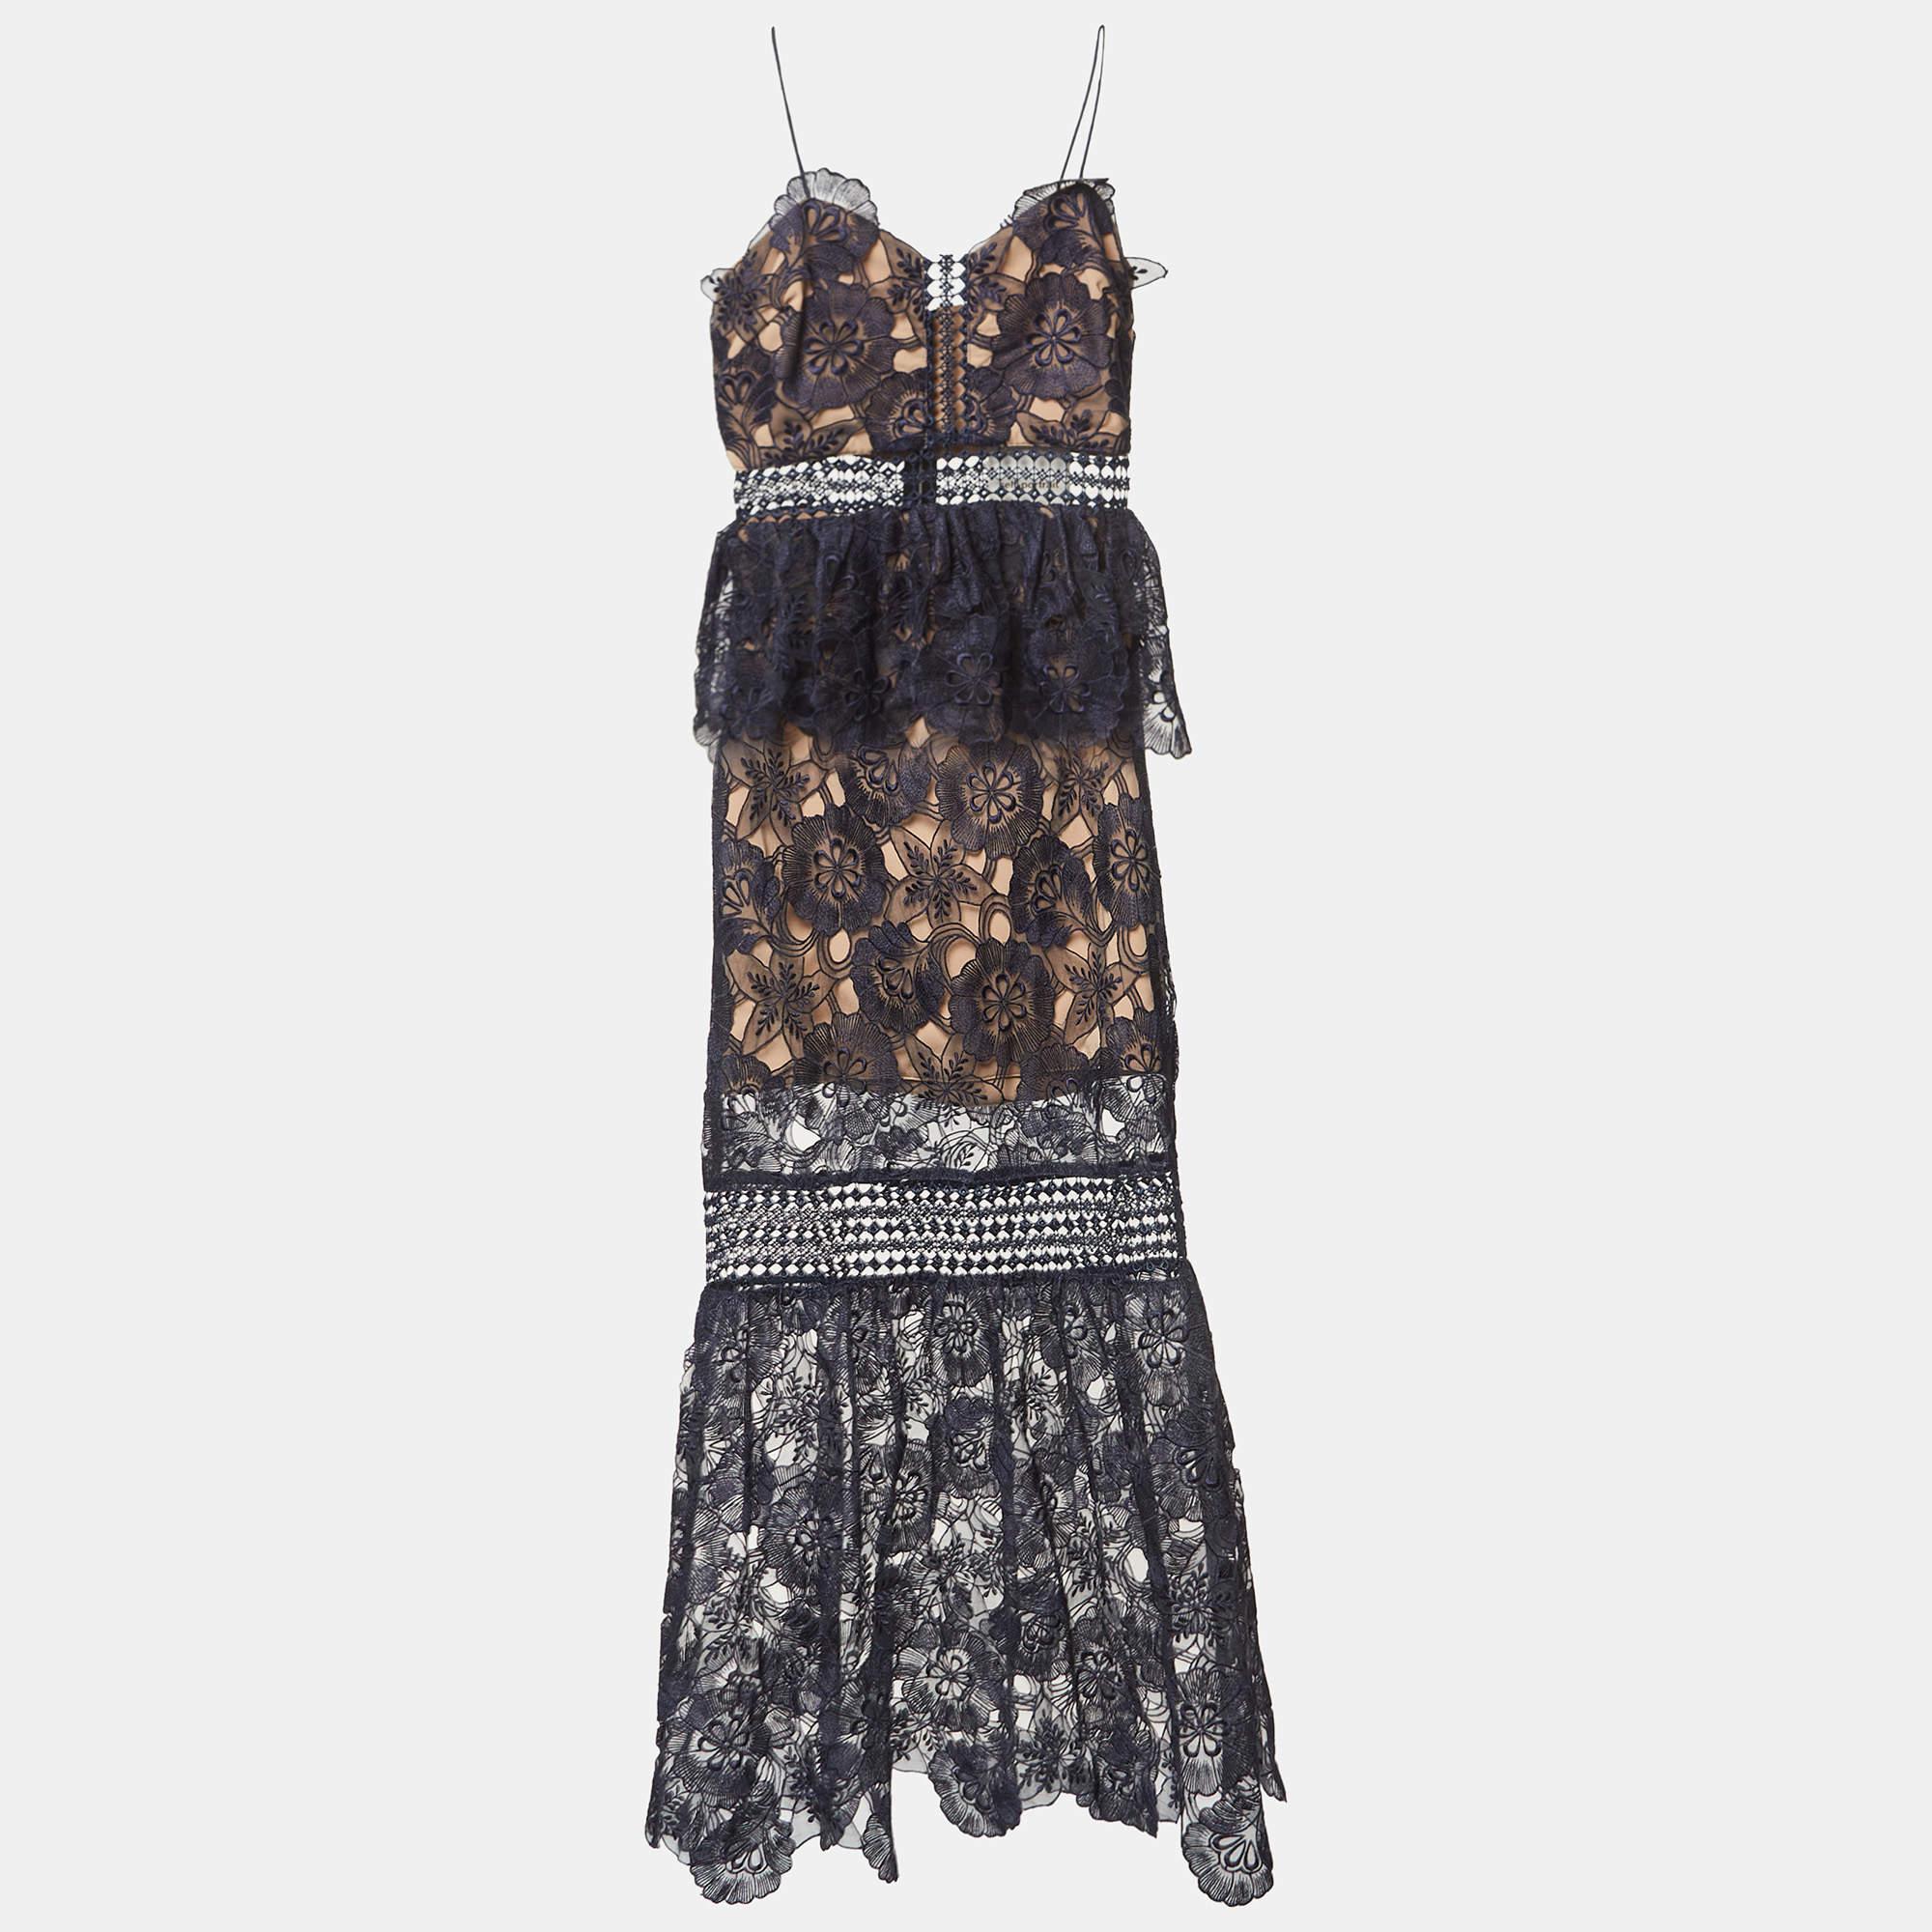 Self-Portrait's idea of femininity and modern approach to silhouettes are evident in this sleeveless dress. Featuring a floral lace design, the gorgeous dress offers a comfortable fit and a beautiful impact.

Includes: Black dust bag, brand tag

